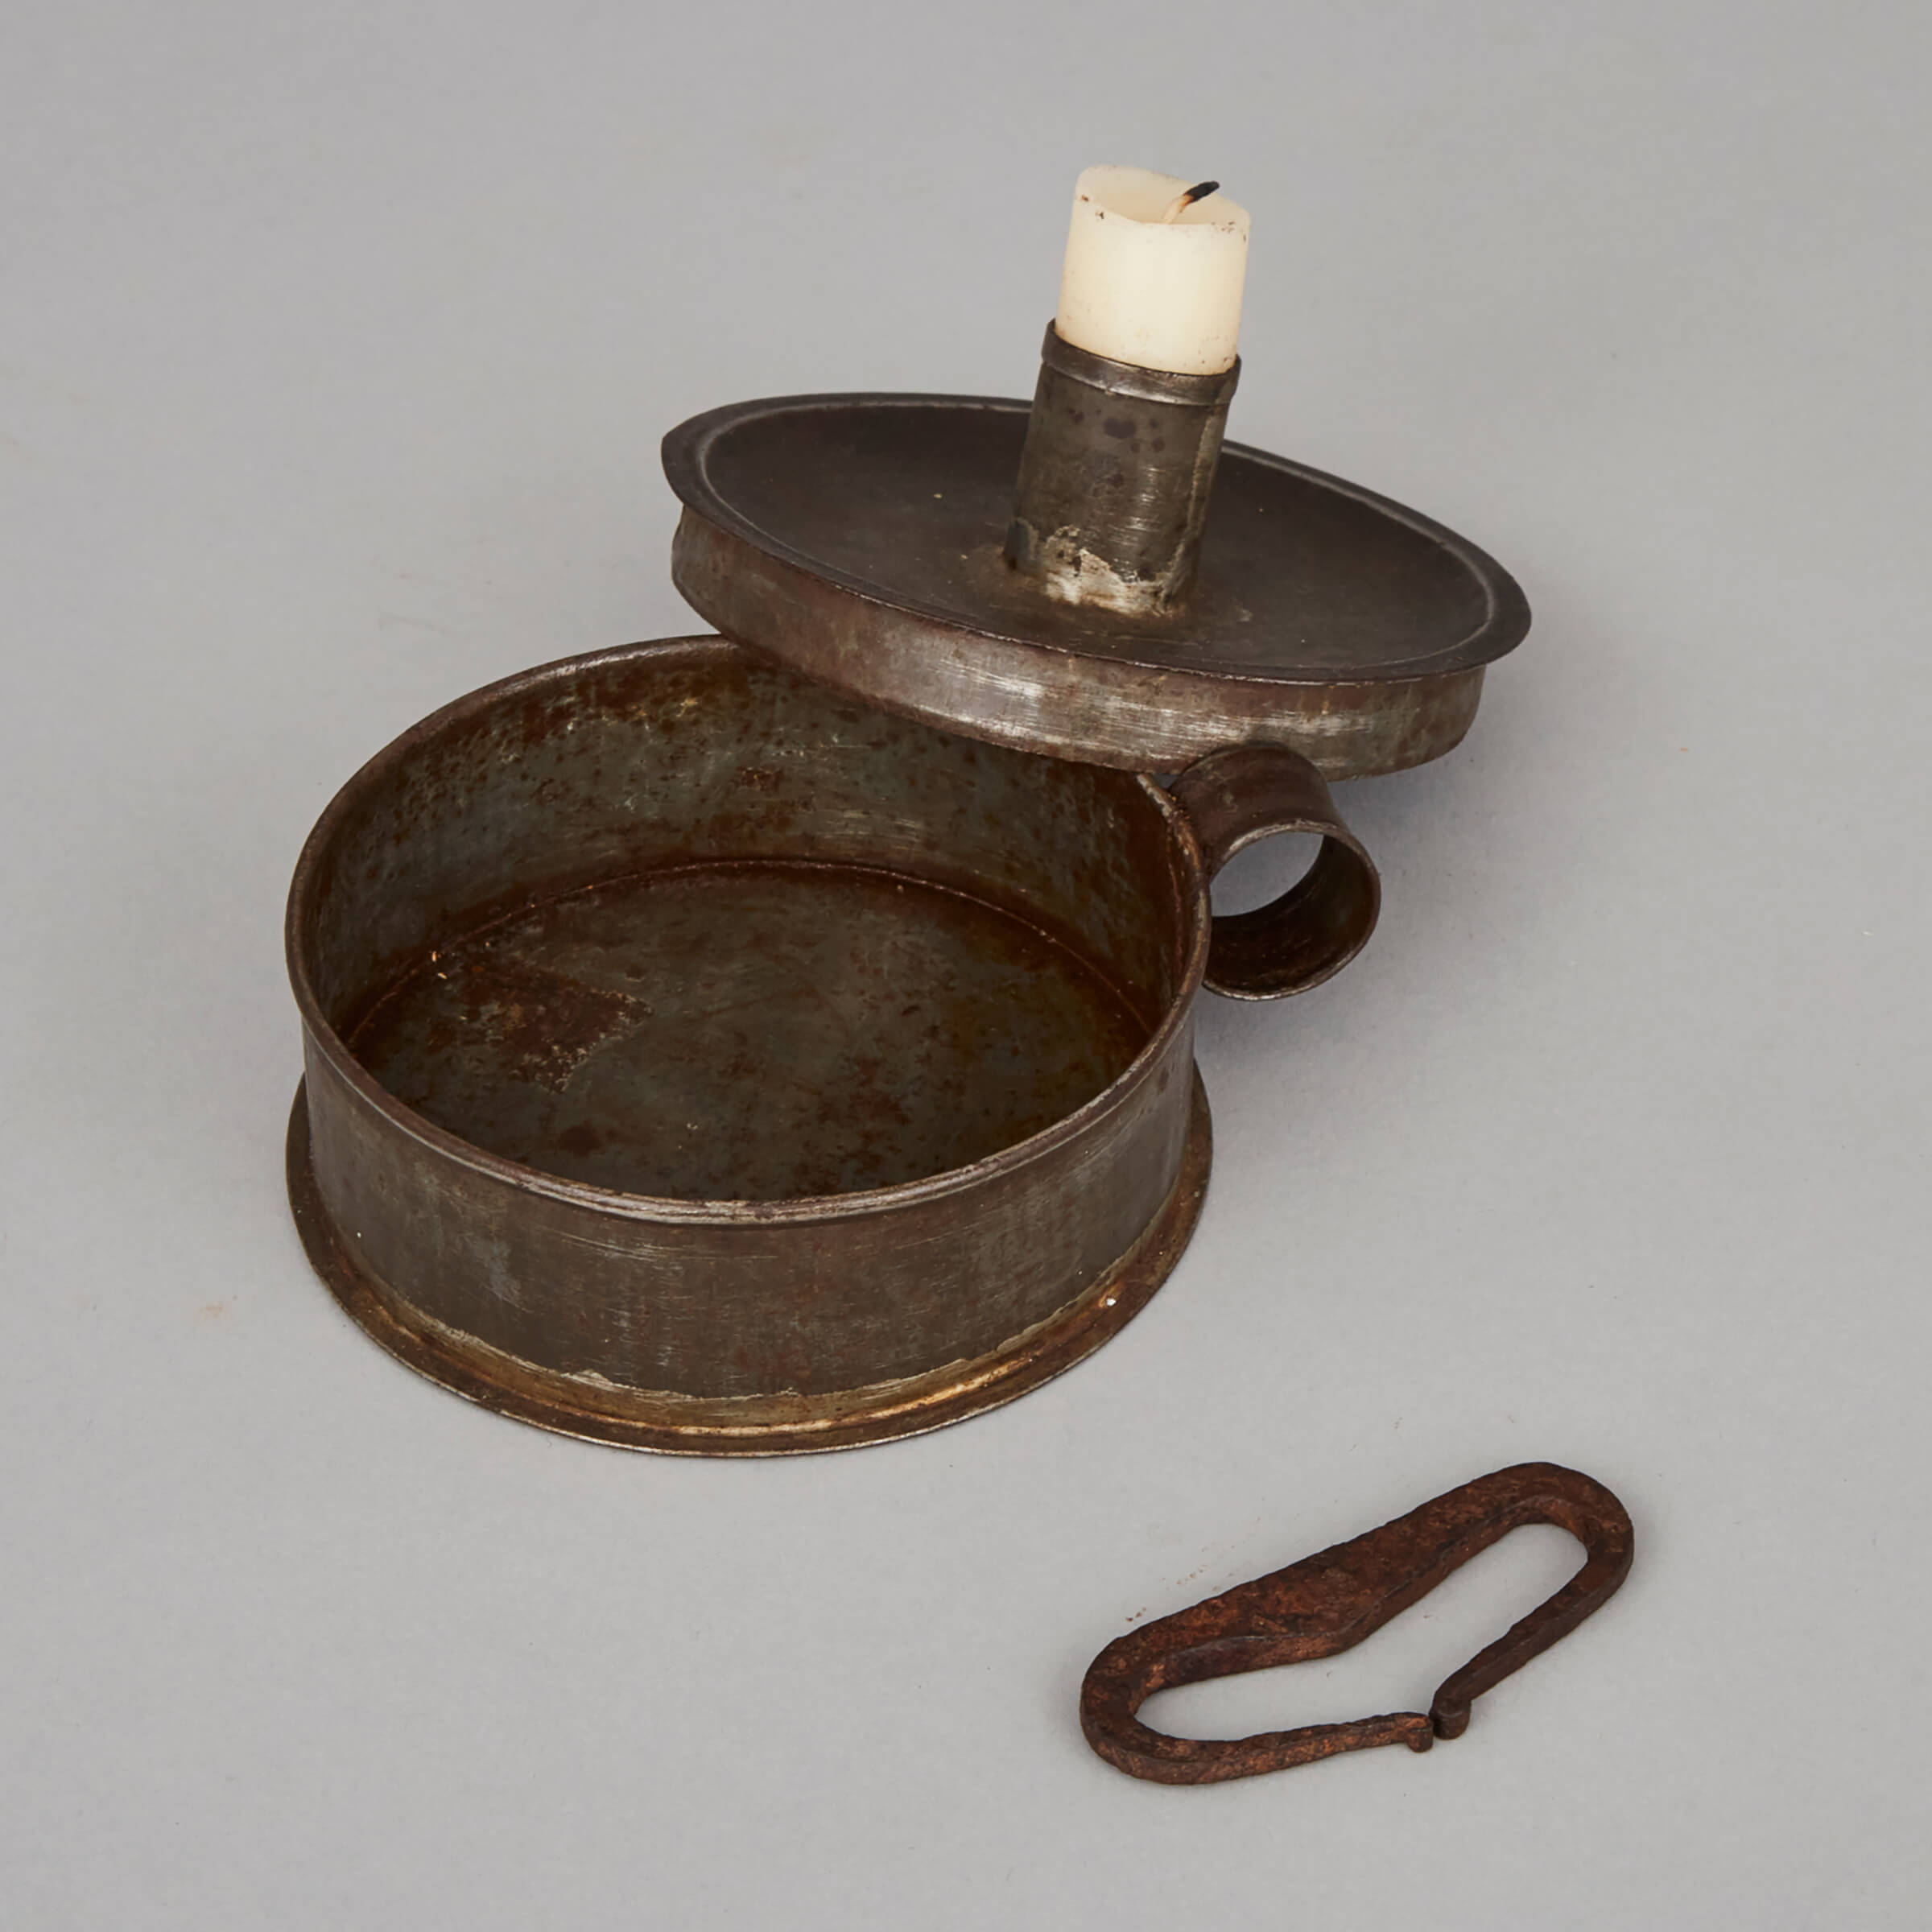 Tinderbox and Striker, 18th century, height 2.5 in — 6.4 cm - Image 2 of 2